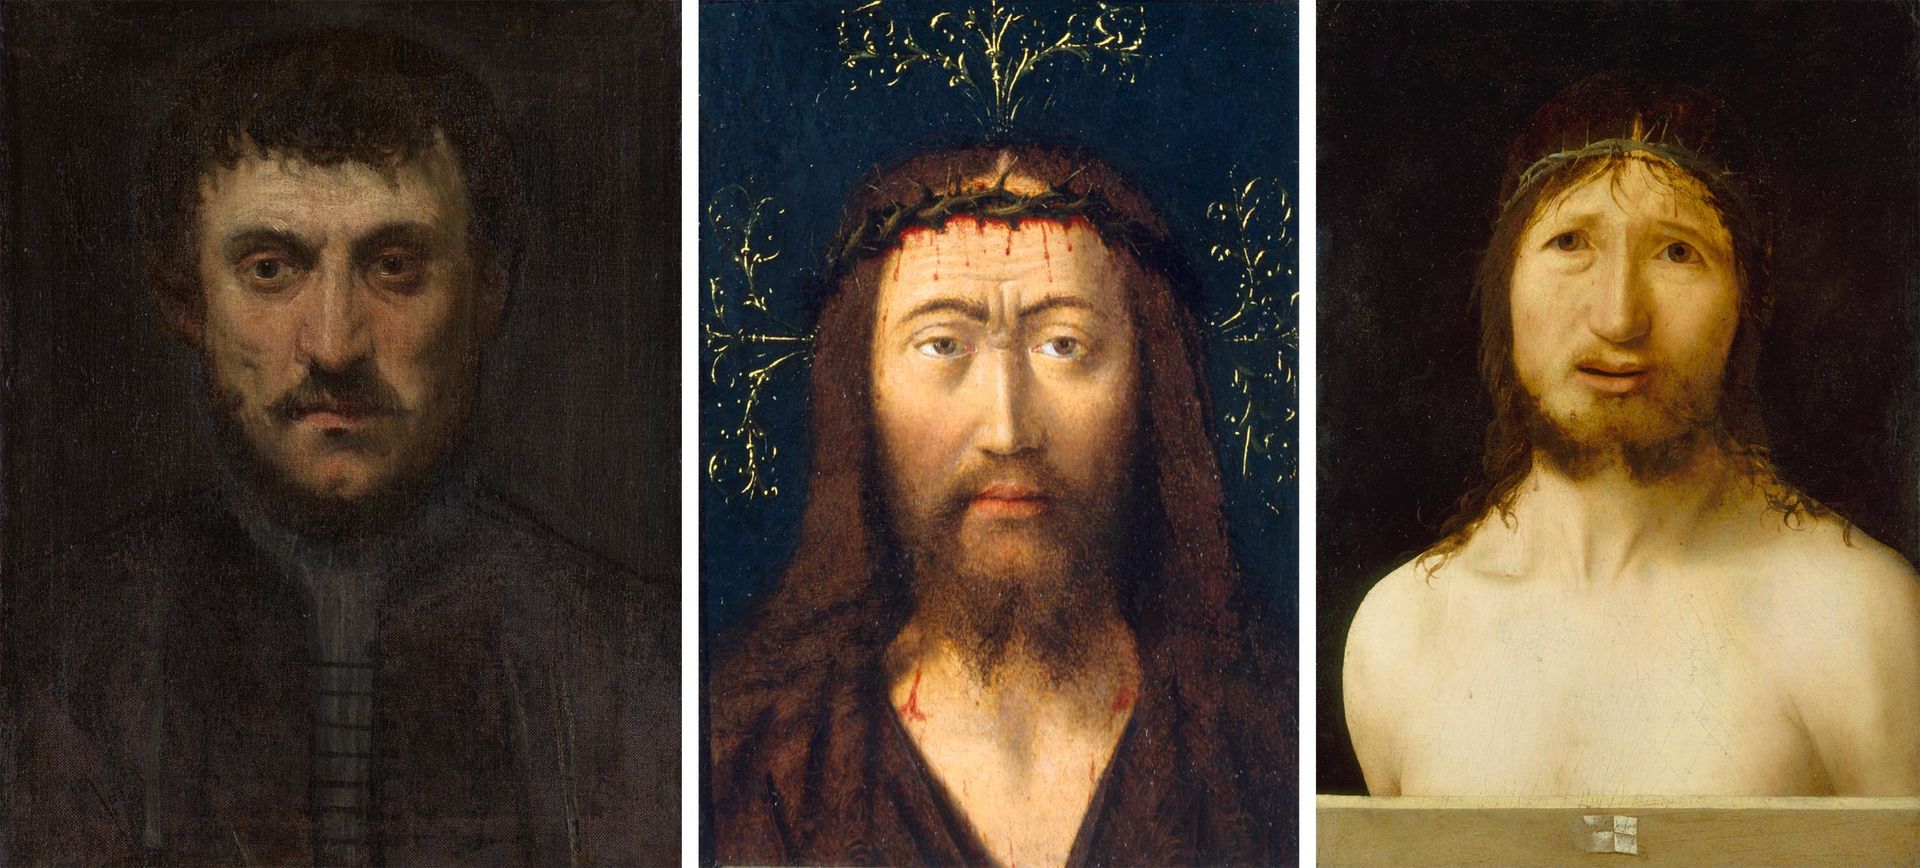 Three portraits of men looking directly at the viewer by Jacopo Tintoretto (left), Petrus Christus (center), and Antonello da Messina (right)